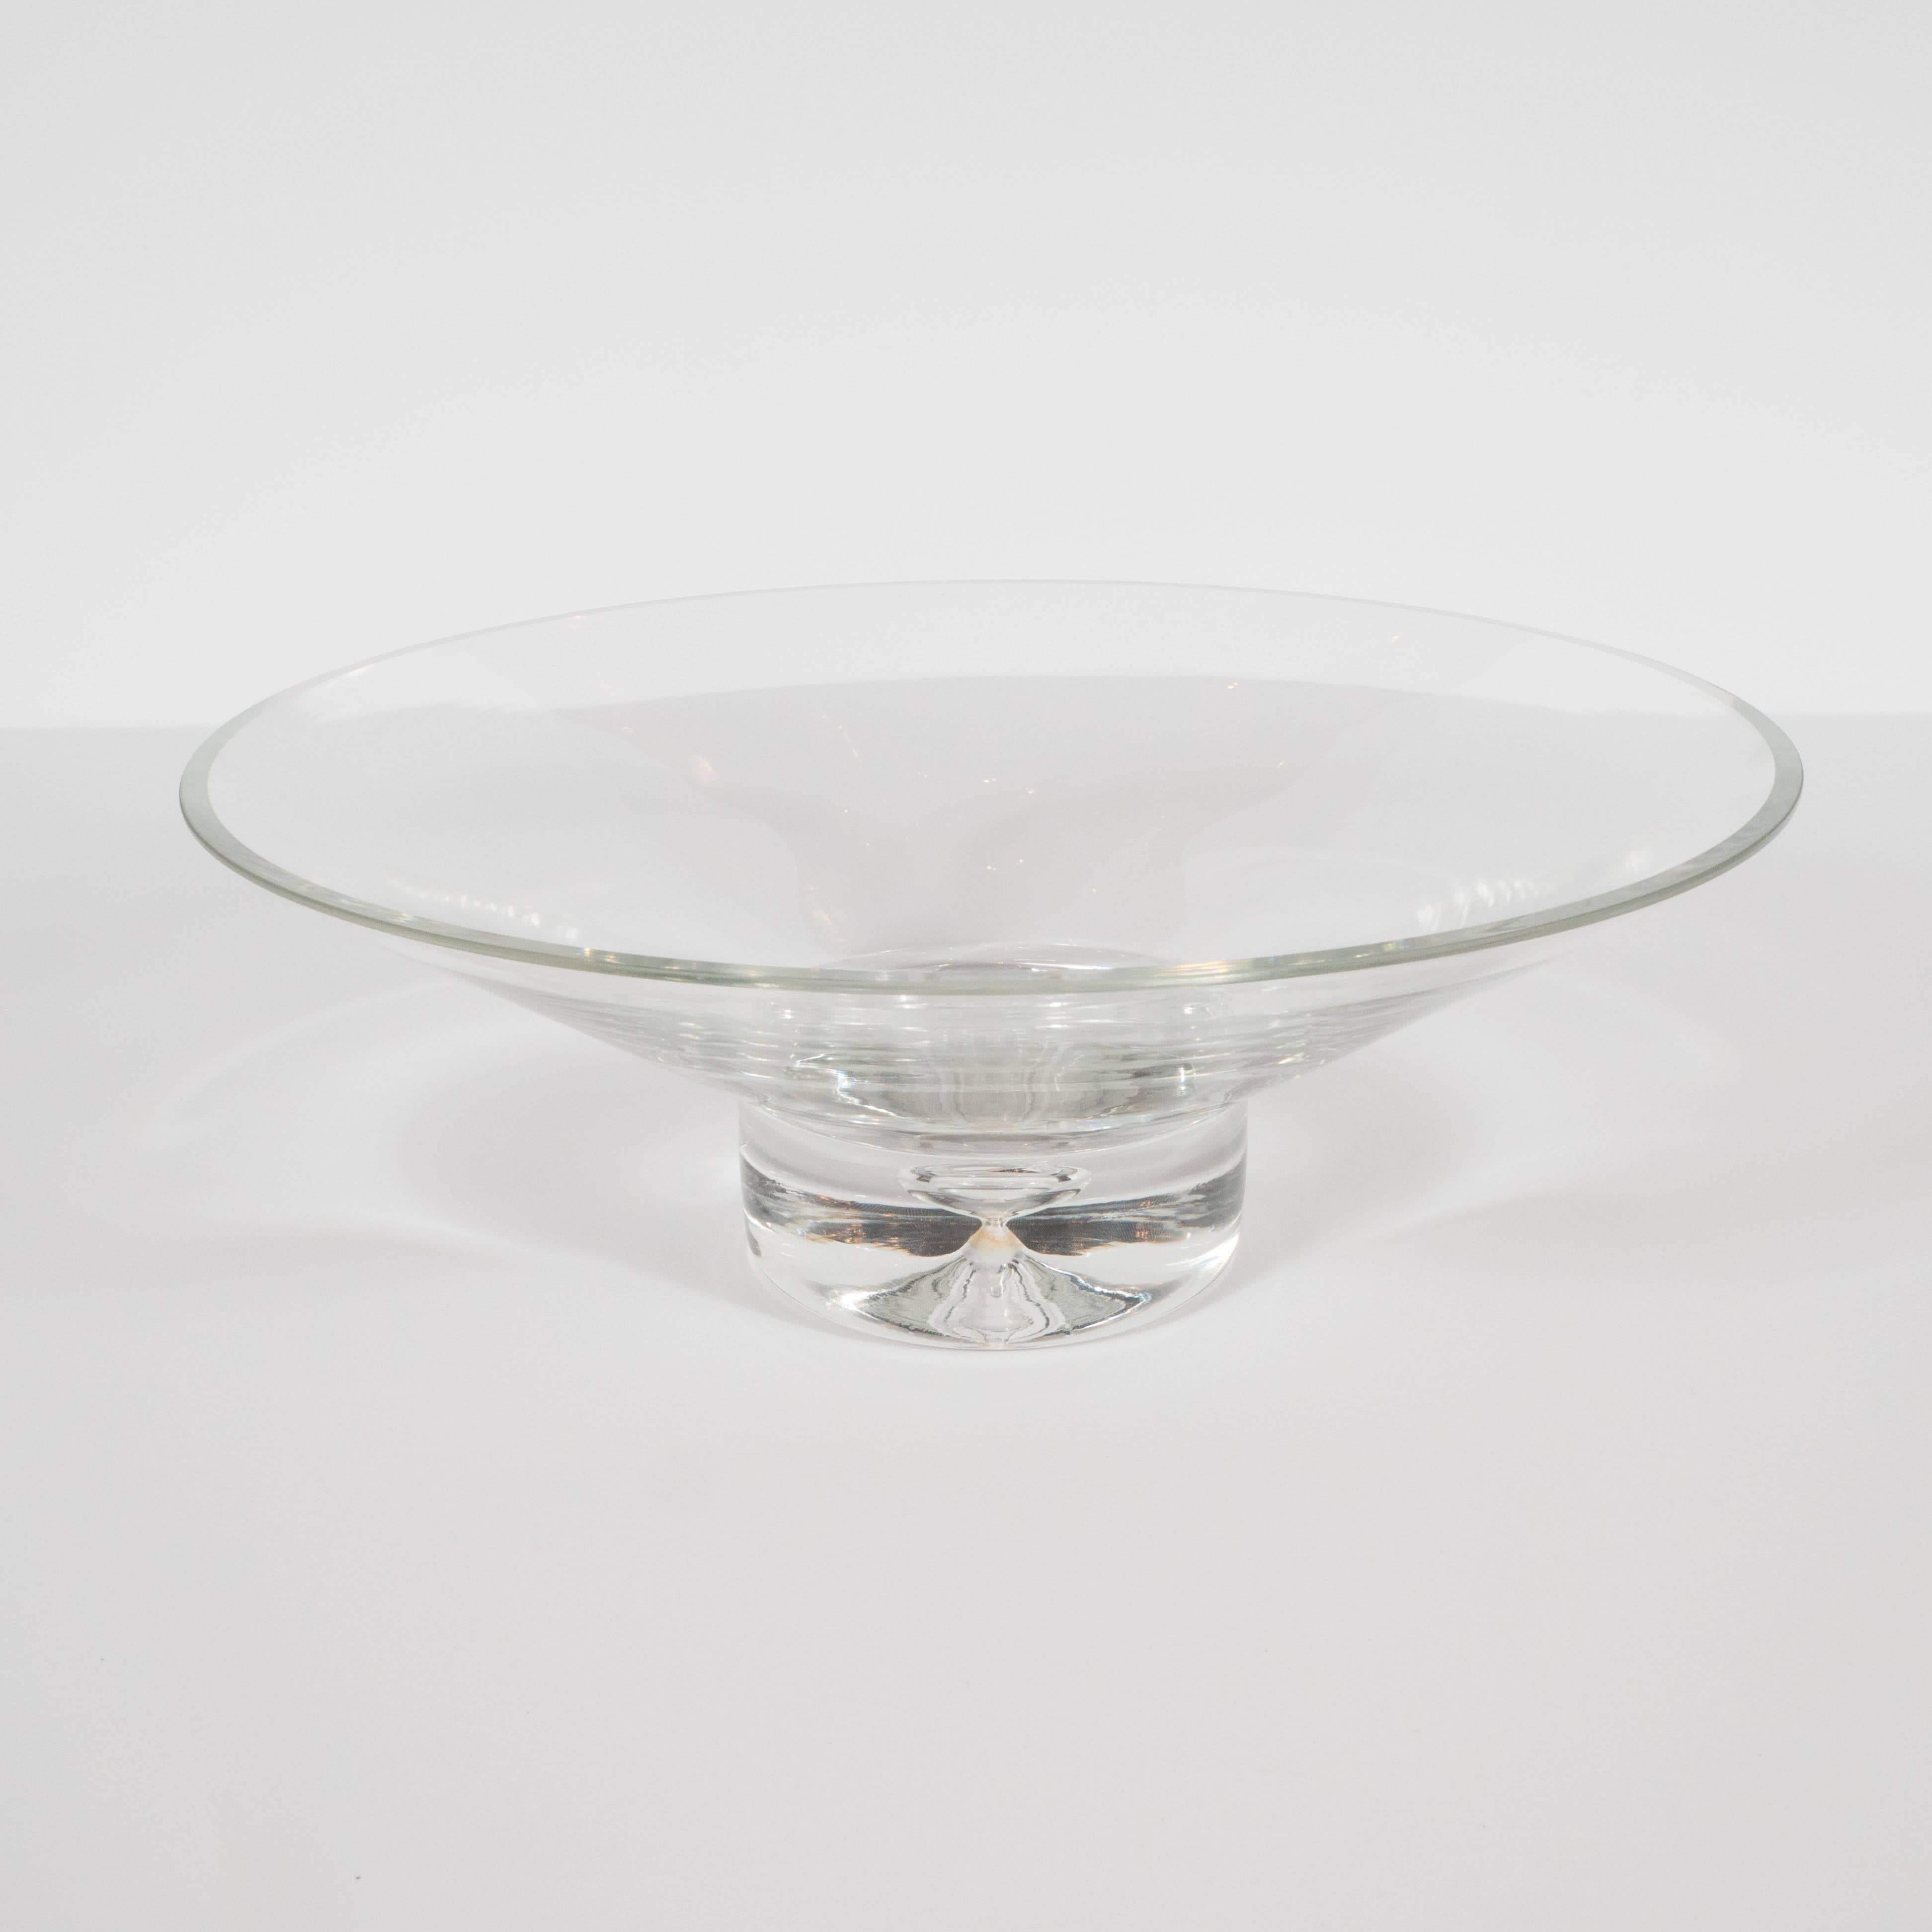 This refined Mid-Century Modern glass bowl was realized by Steuben Glass Works of Corning, New York, circa 1970. Steuben, founded in 1903, represents one of America's premier makers of glass products in the 20th century. This piece, with its elegant